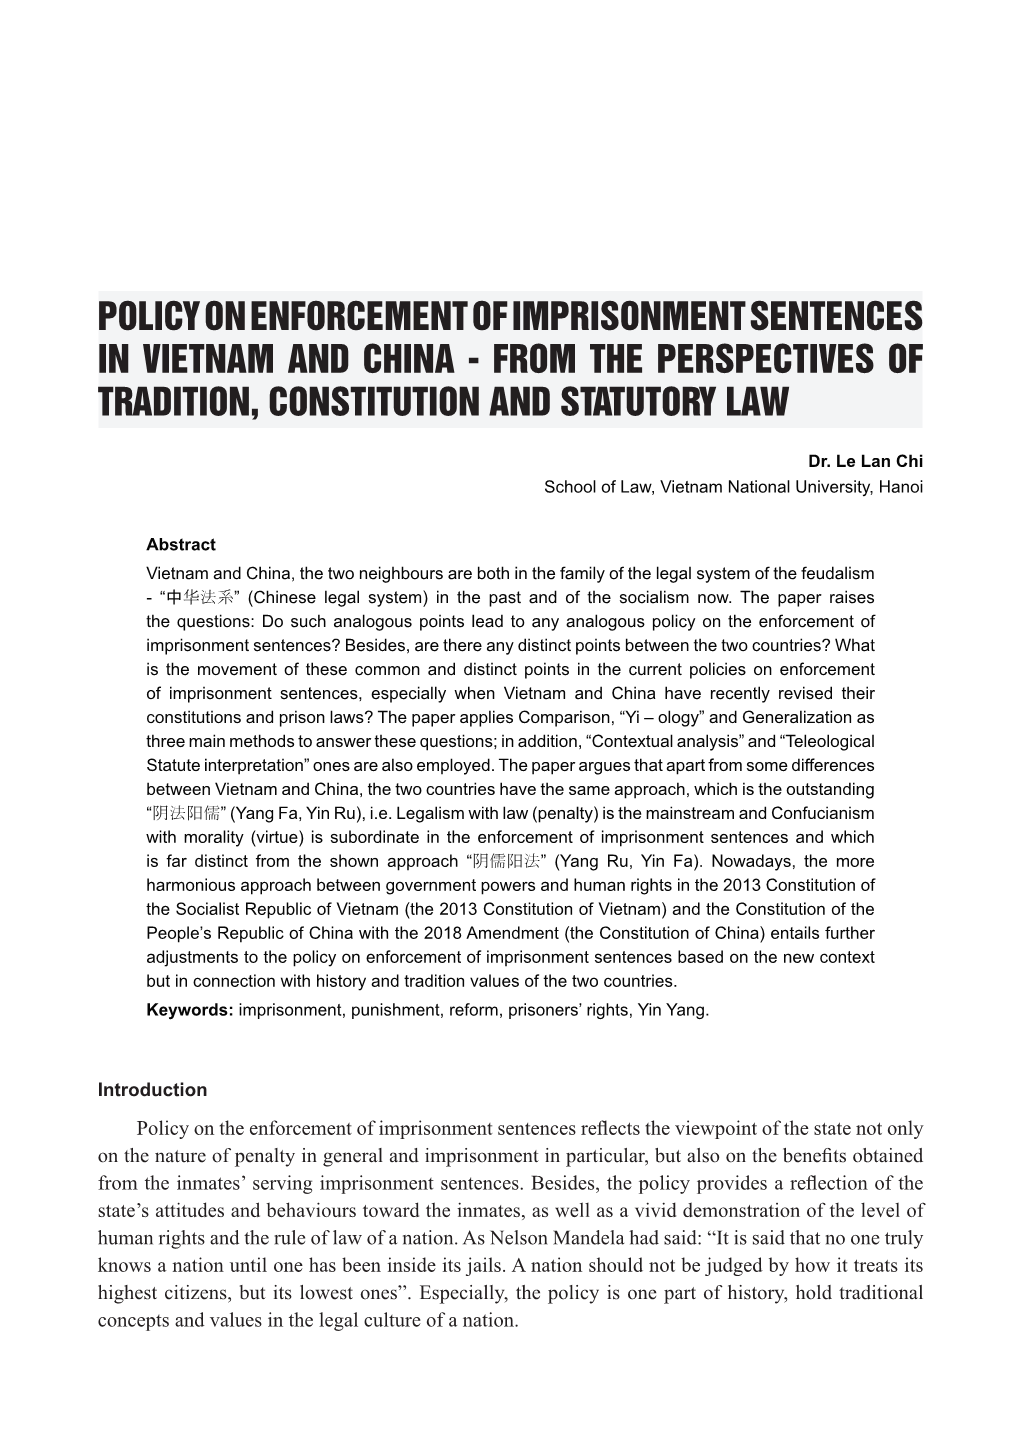 Policy on Enforcement of Imprisonment Sentences in Vietnam and China - from the Perspectives of Tradition, Constitution and Statutory Law